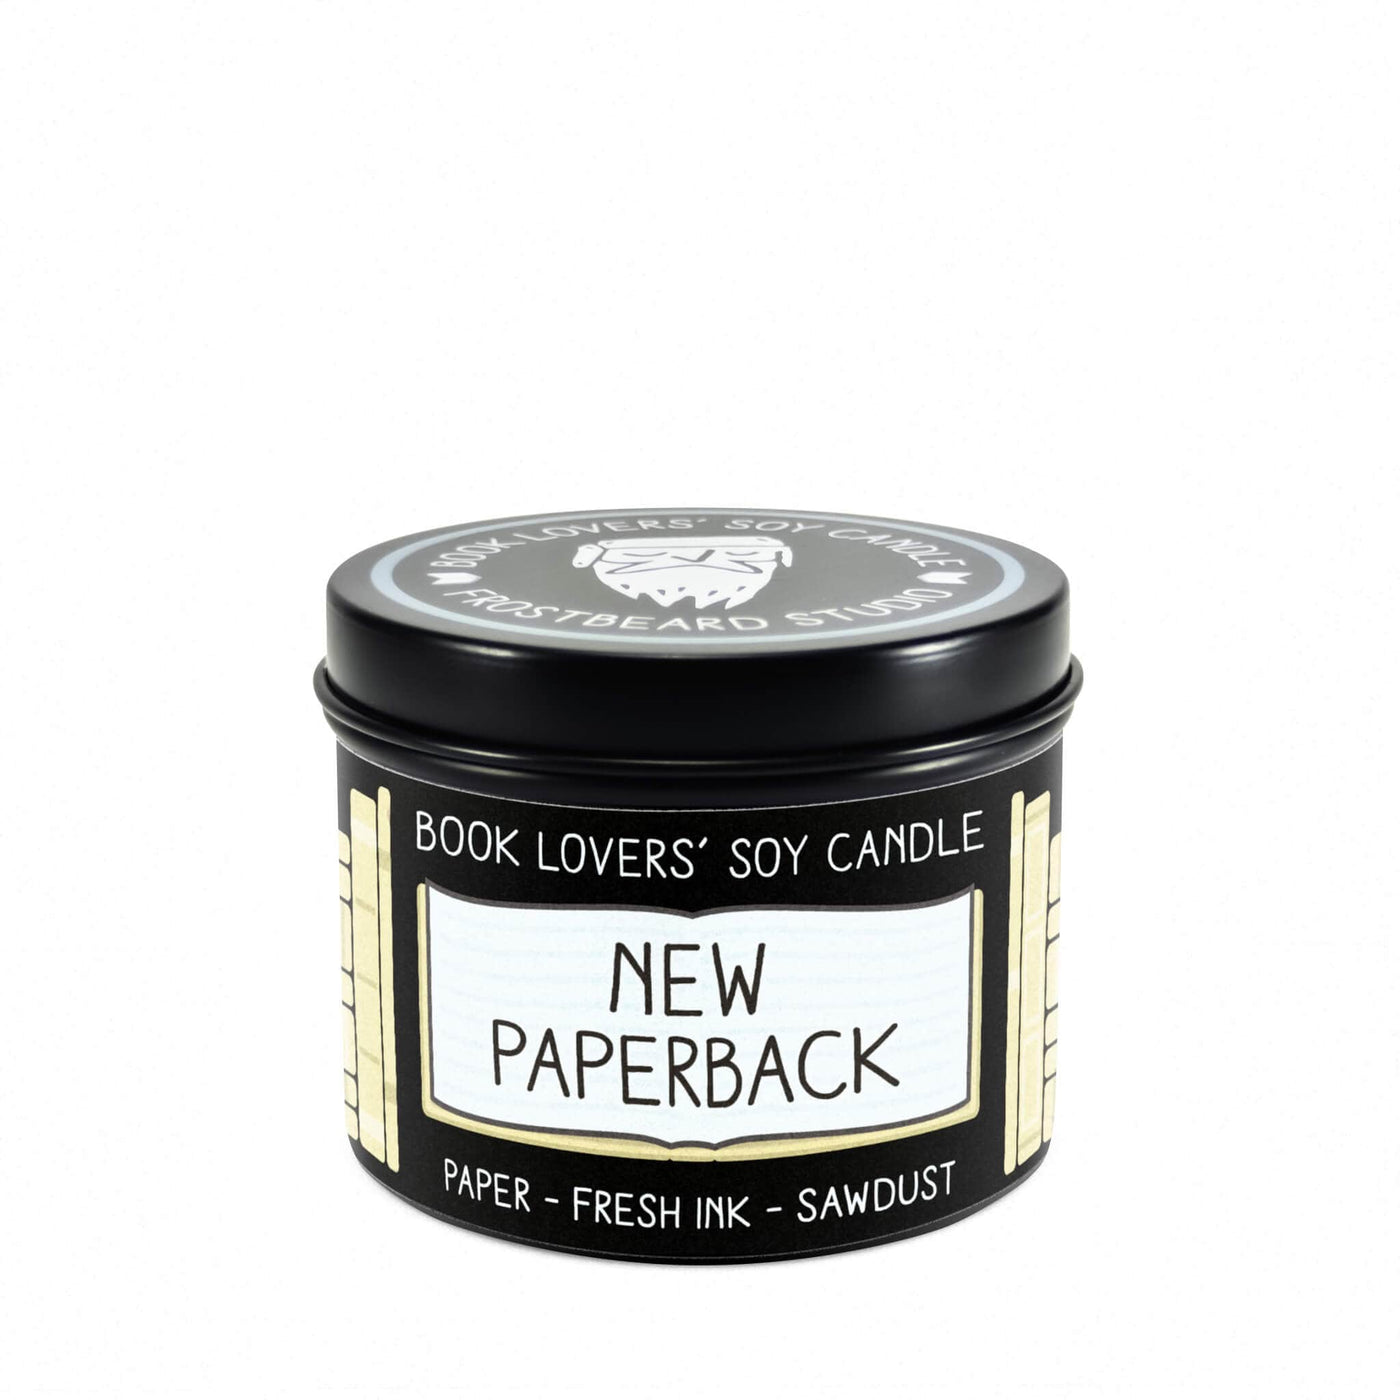 New Paperback  -  4 oz Tin  -  Book Lovers' Soy Candle  -  Frostbeard Studio